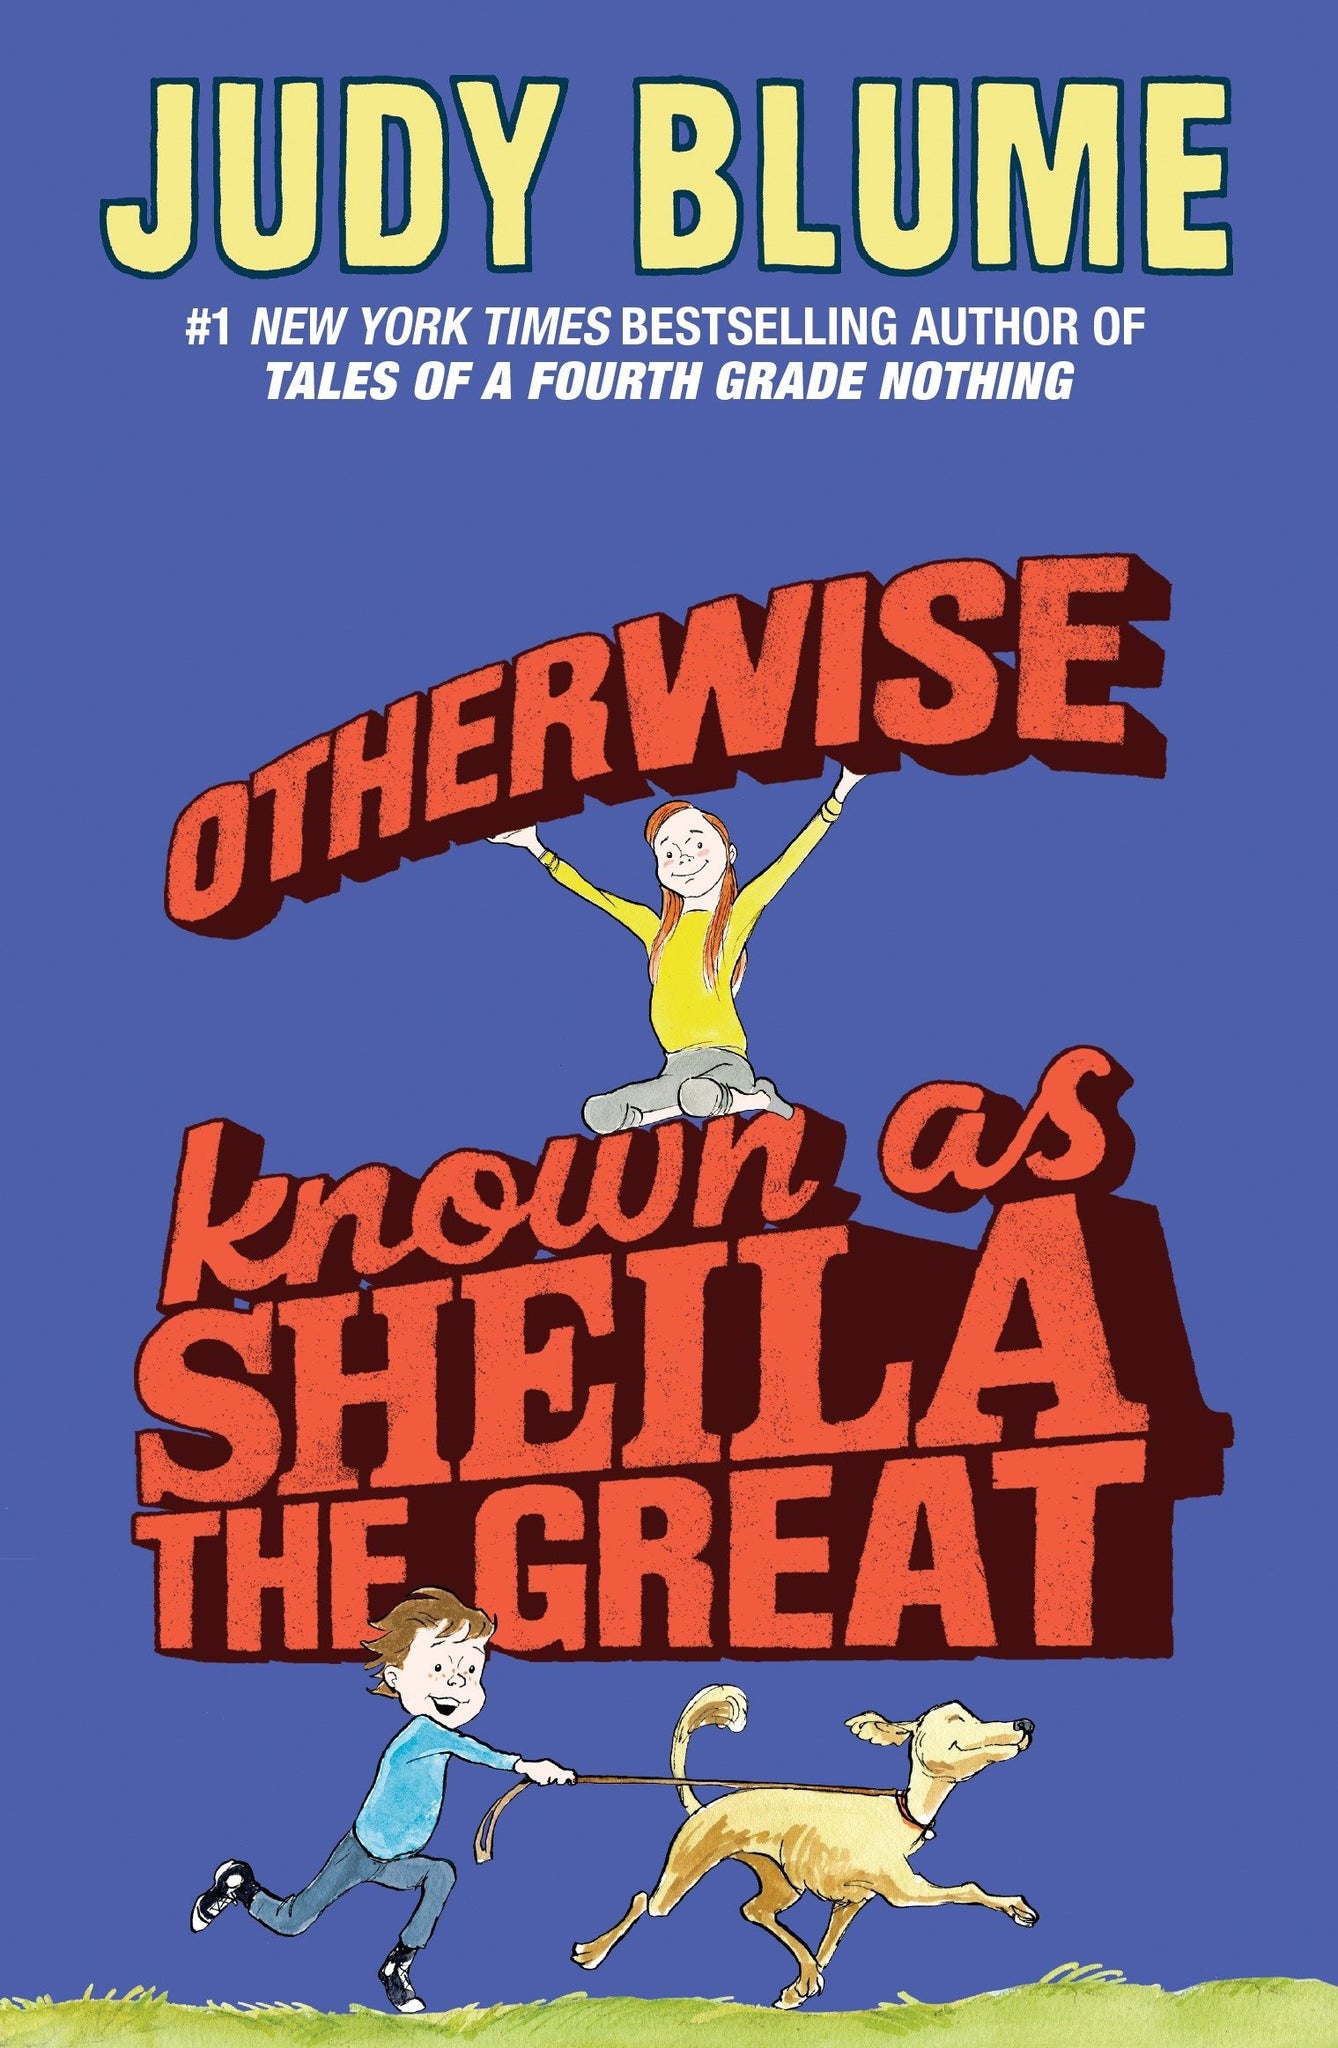 Fudge #2 : Otherwise Known as Sheila the Great by Judy Blume